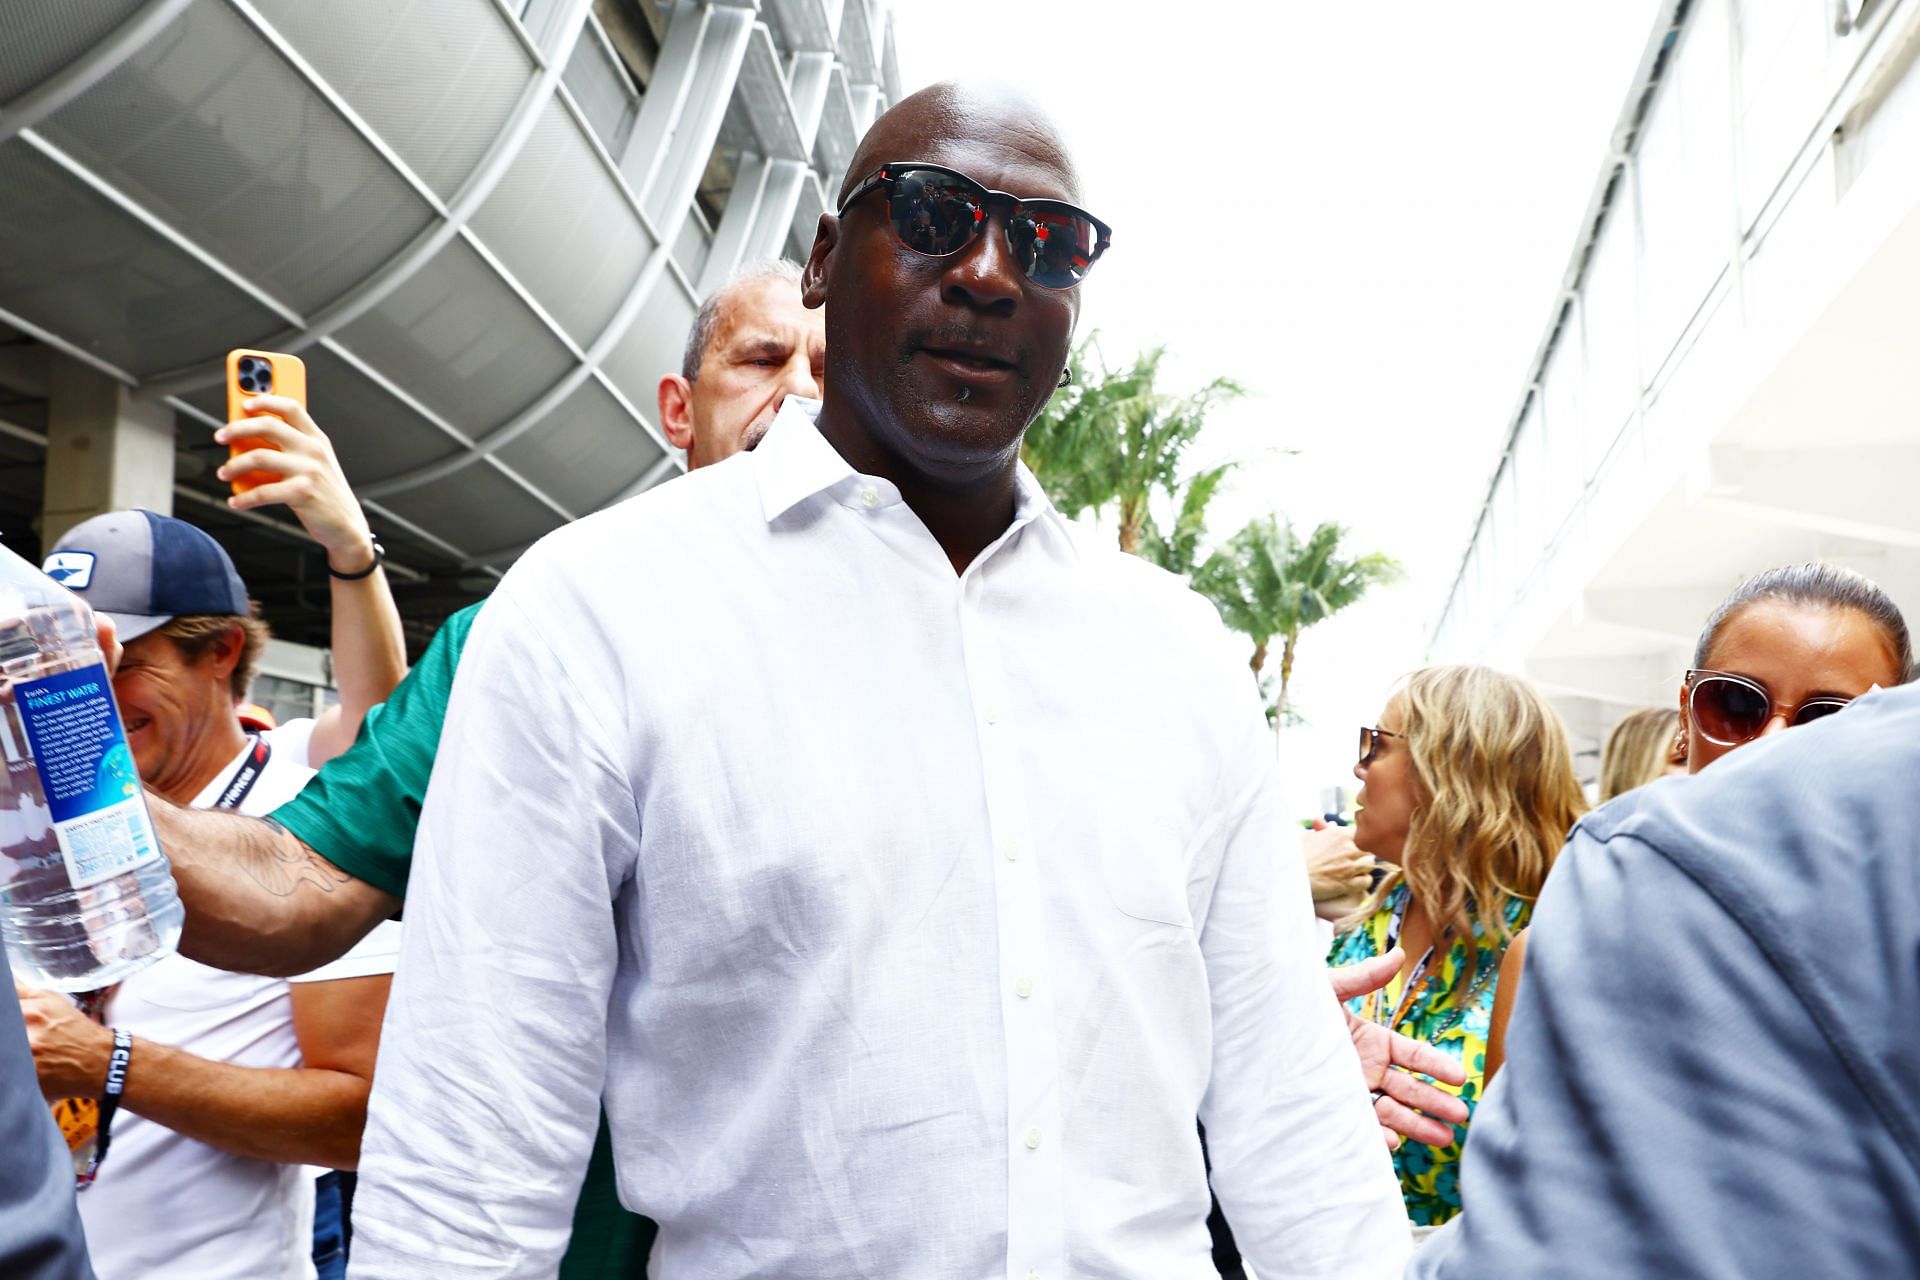 NBA Hall of Famer and arguably the all-time greatest player, Michael Jordan